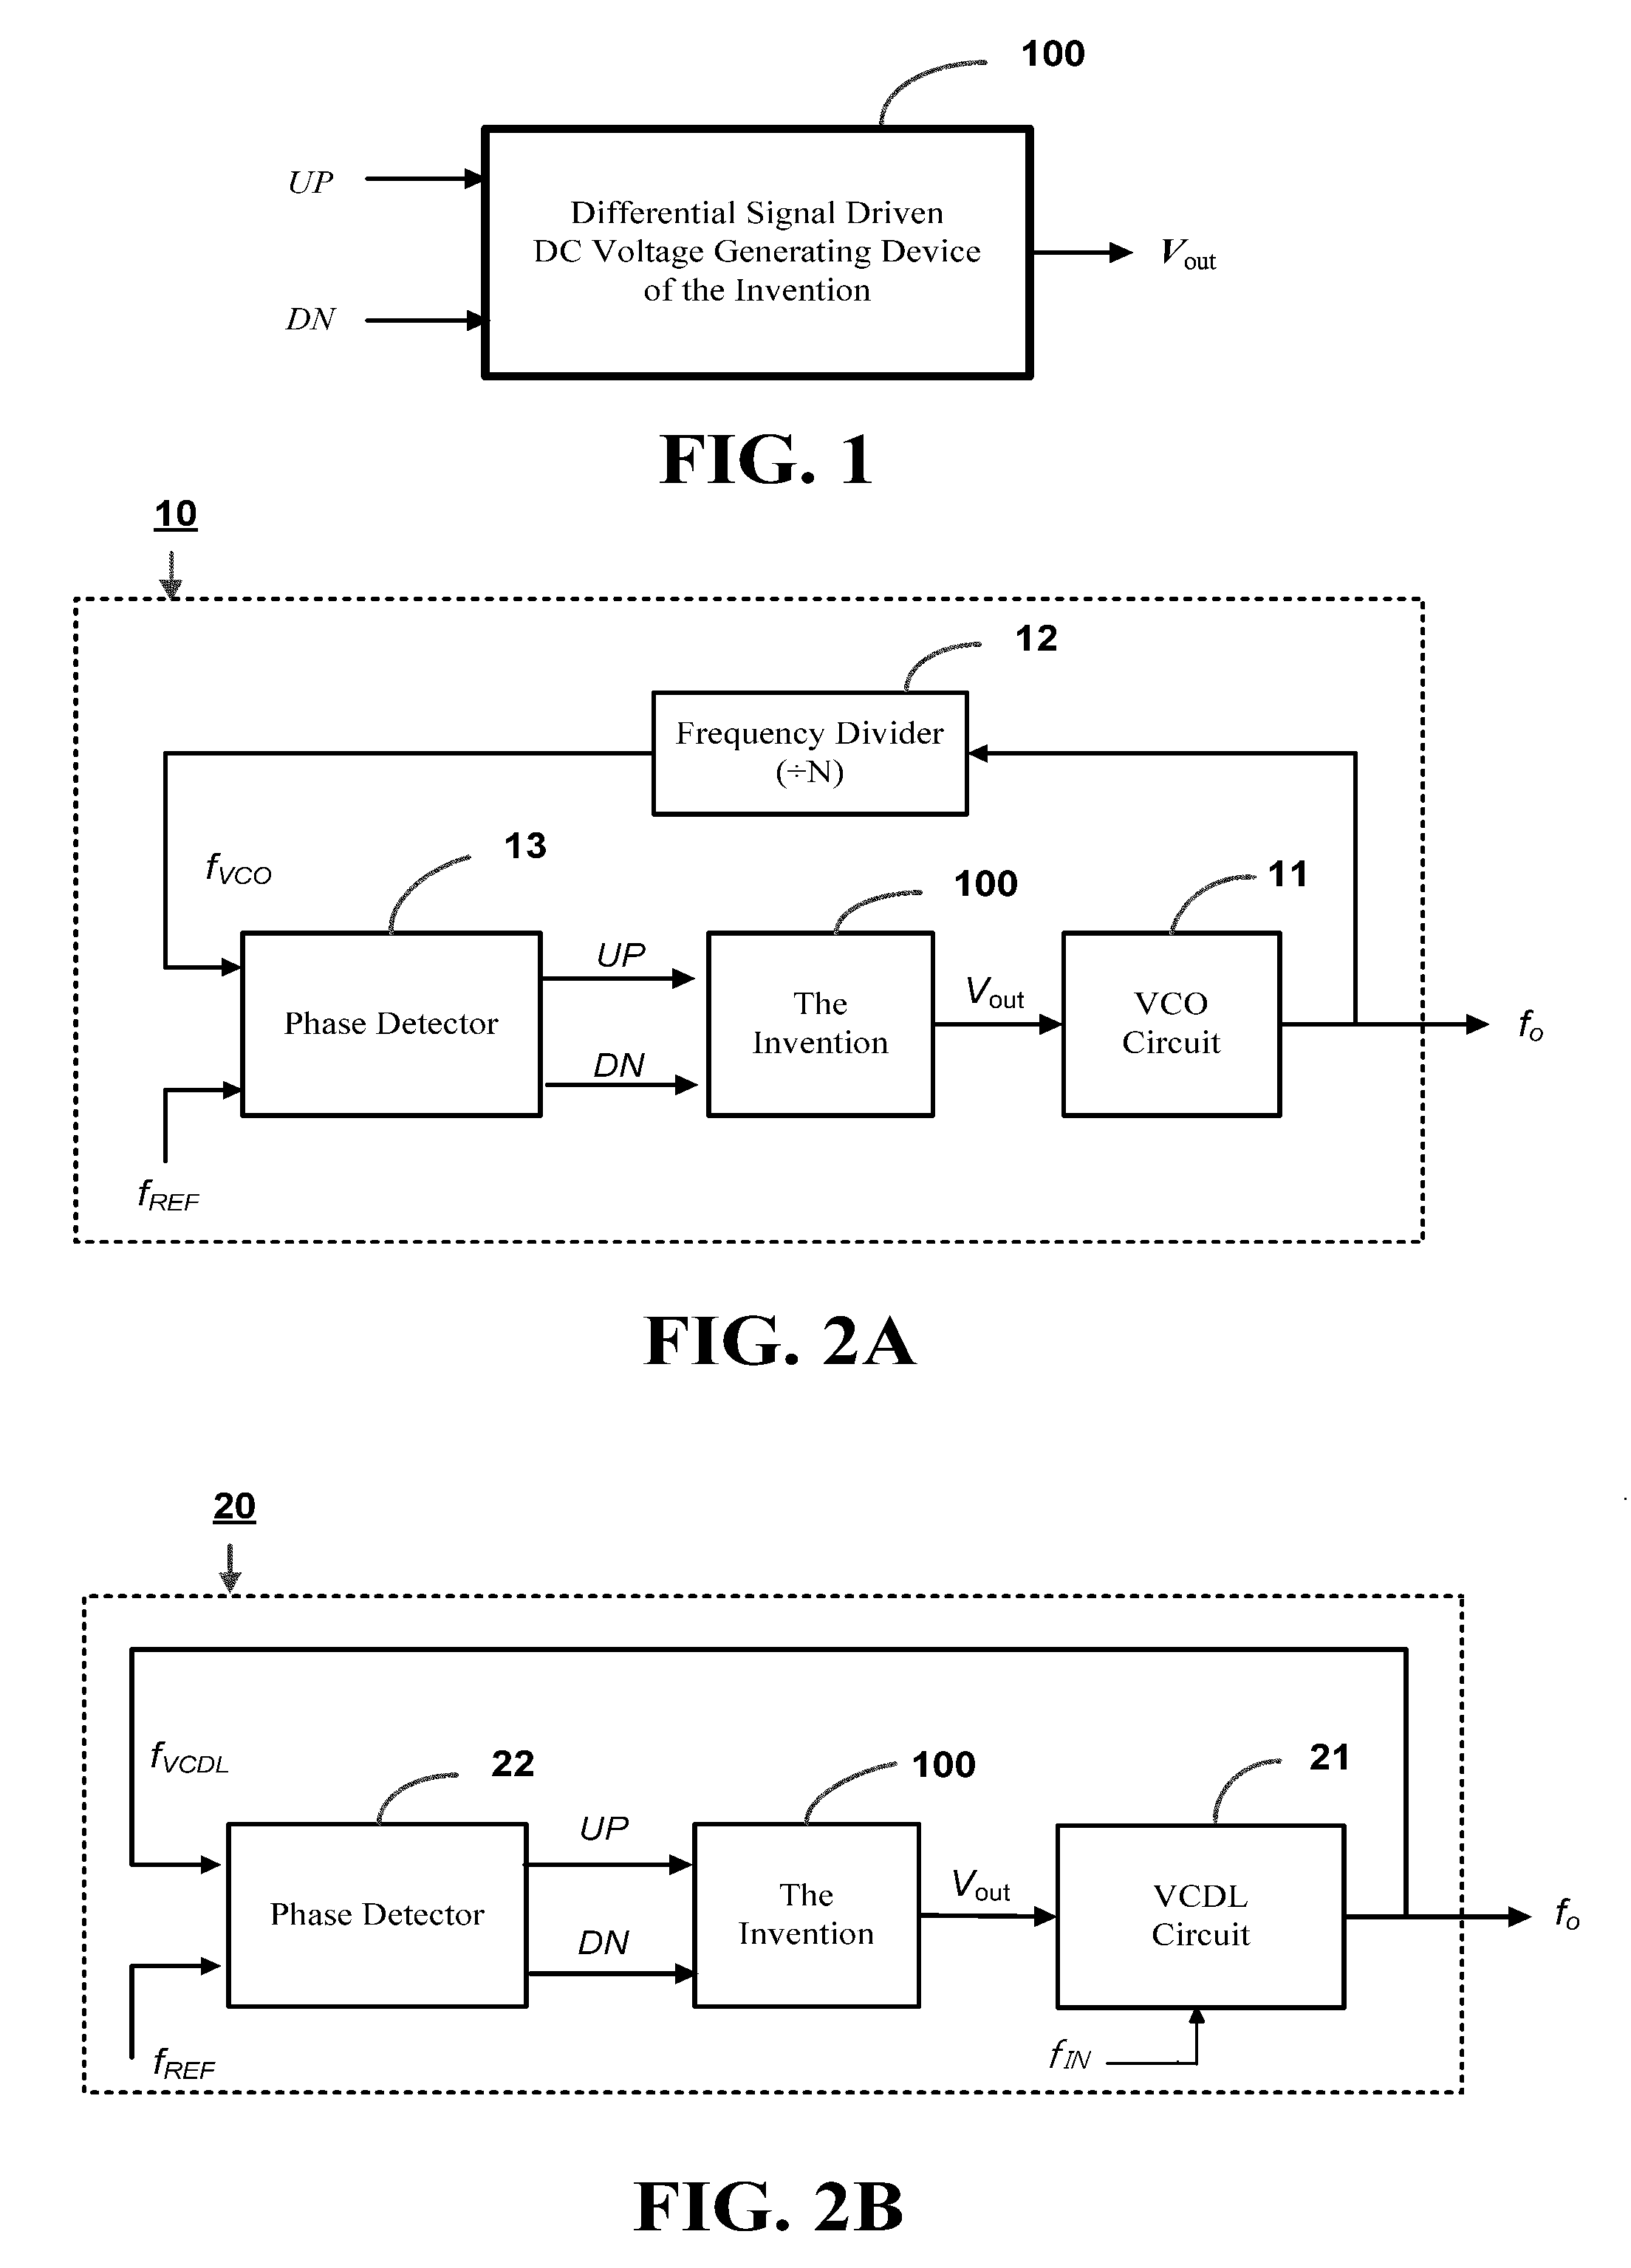 Differential signal driven direct-current voltage generating device